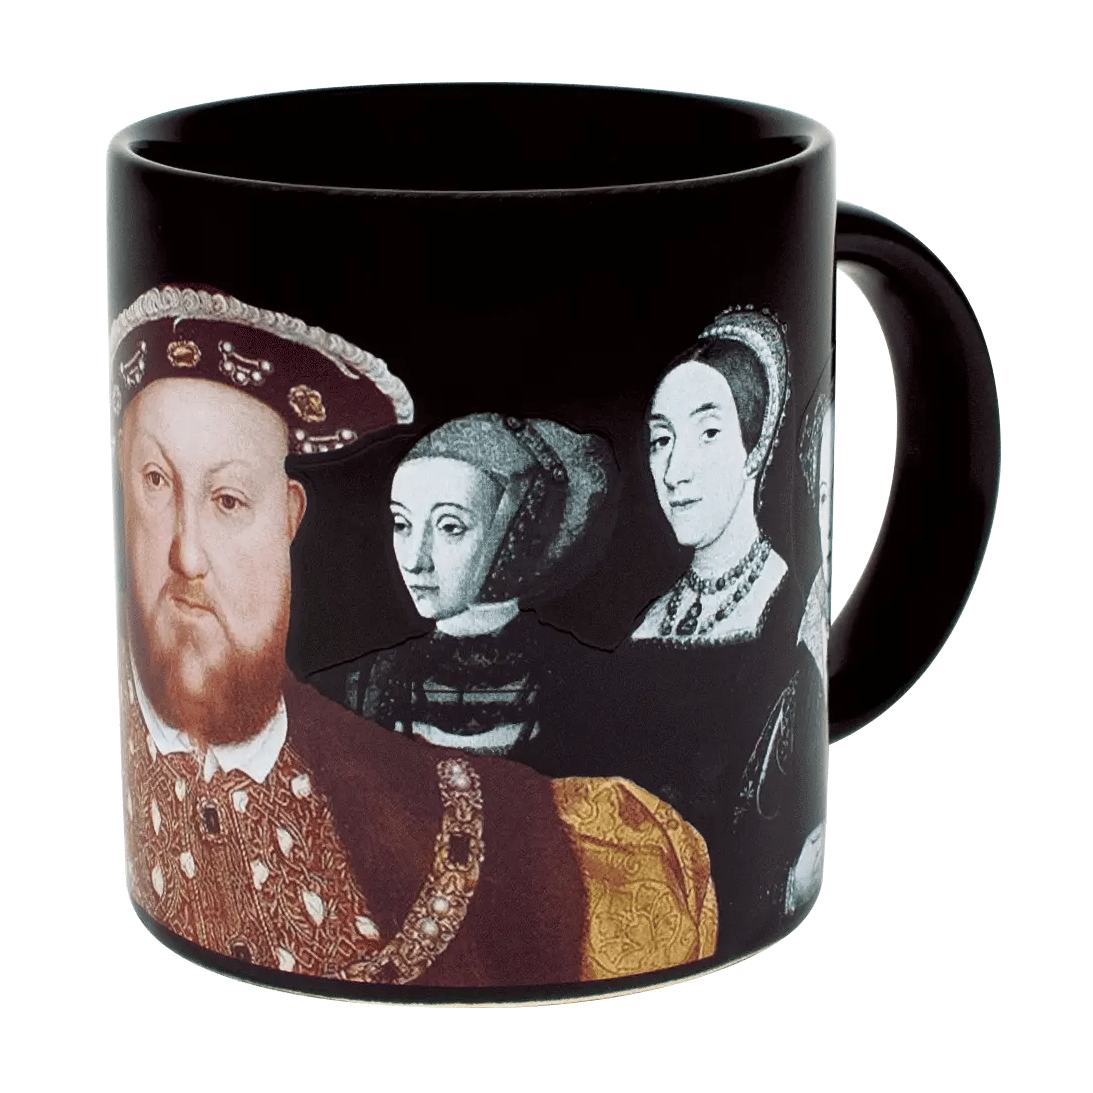 King Henry VIII and his disappearing wives Mug - SECOND